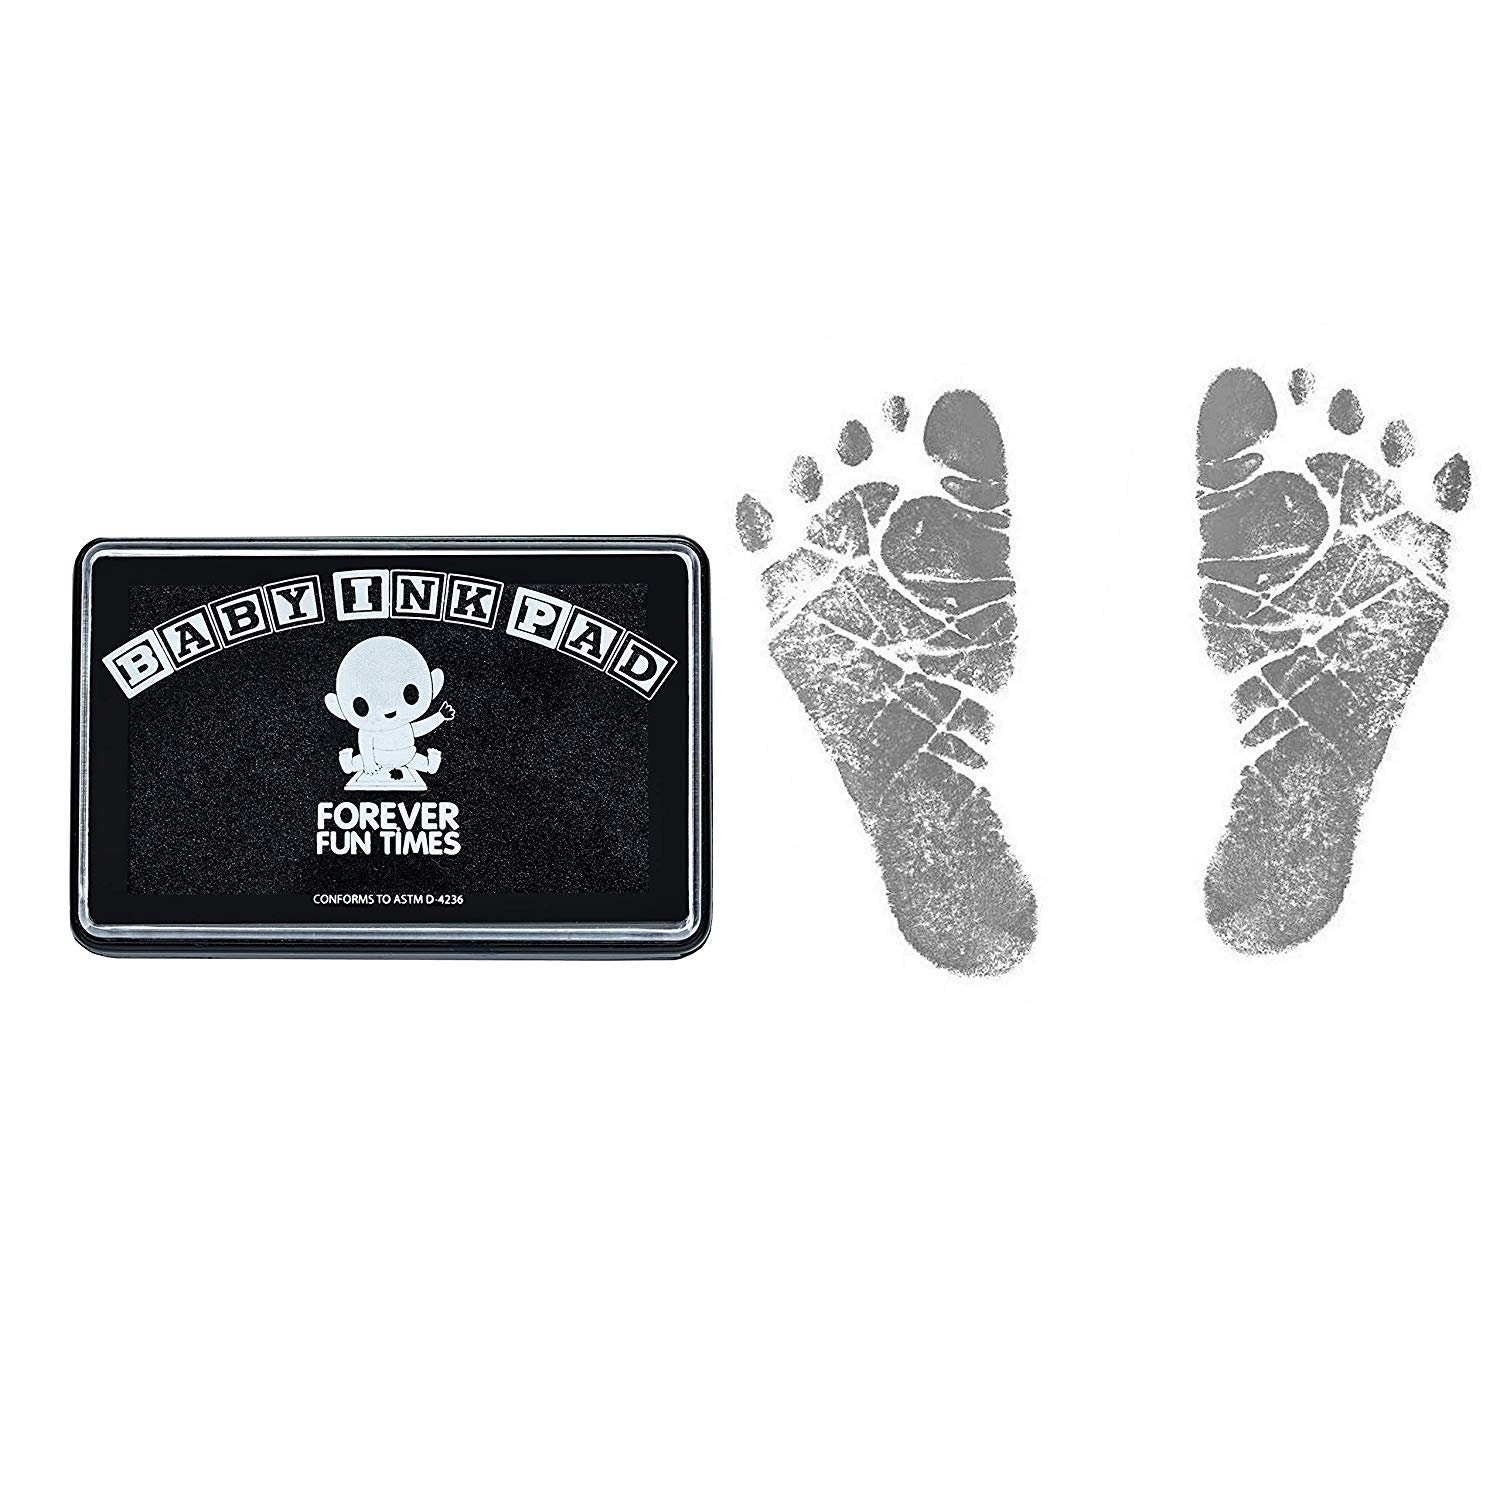 Baby Hand and Footprint Kit Get Hundreds of Detailed Prints With